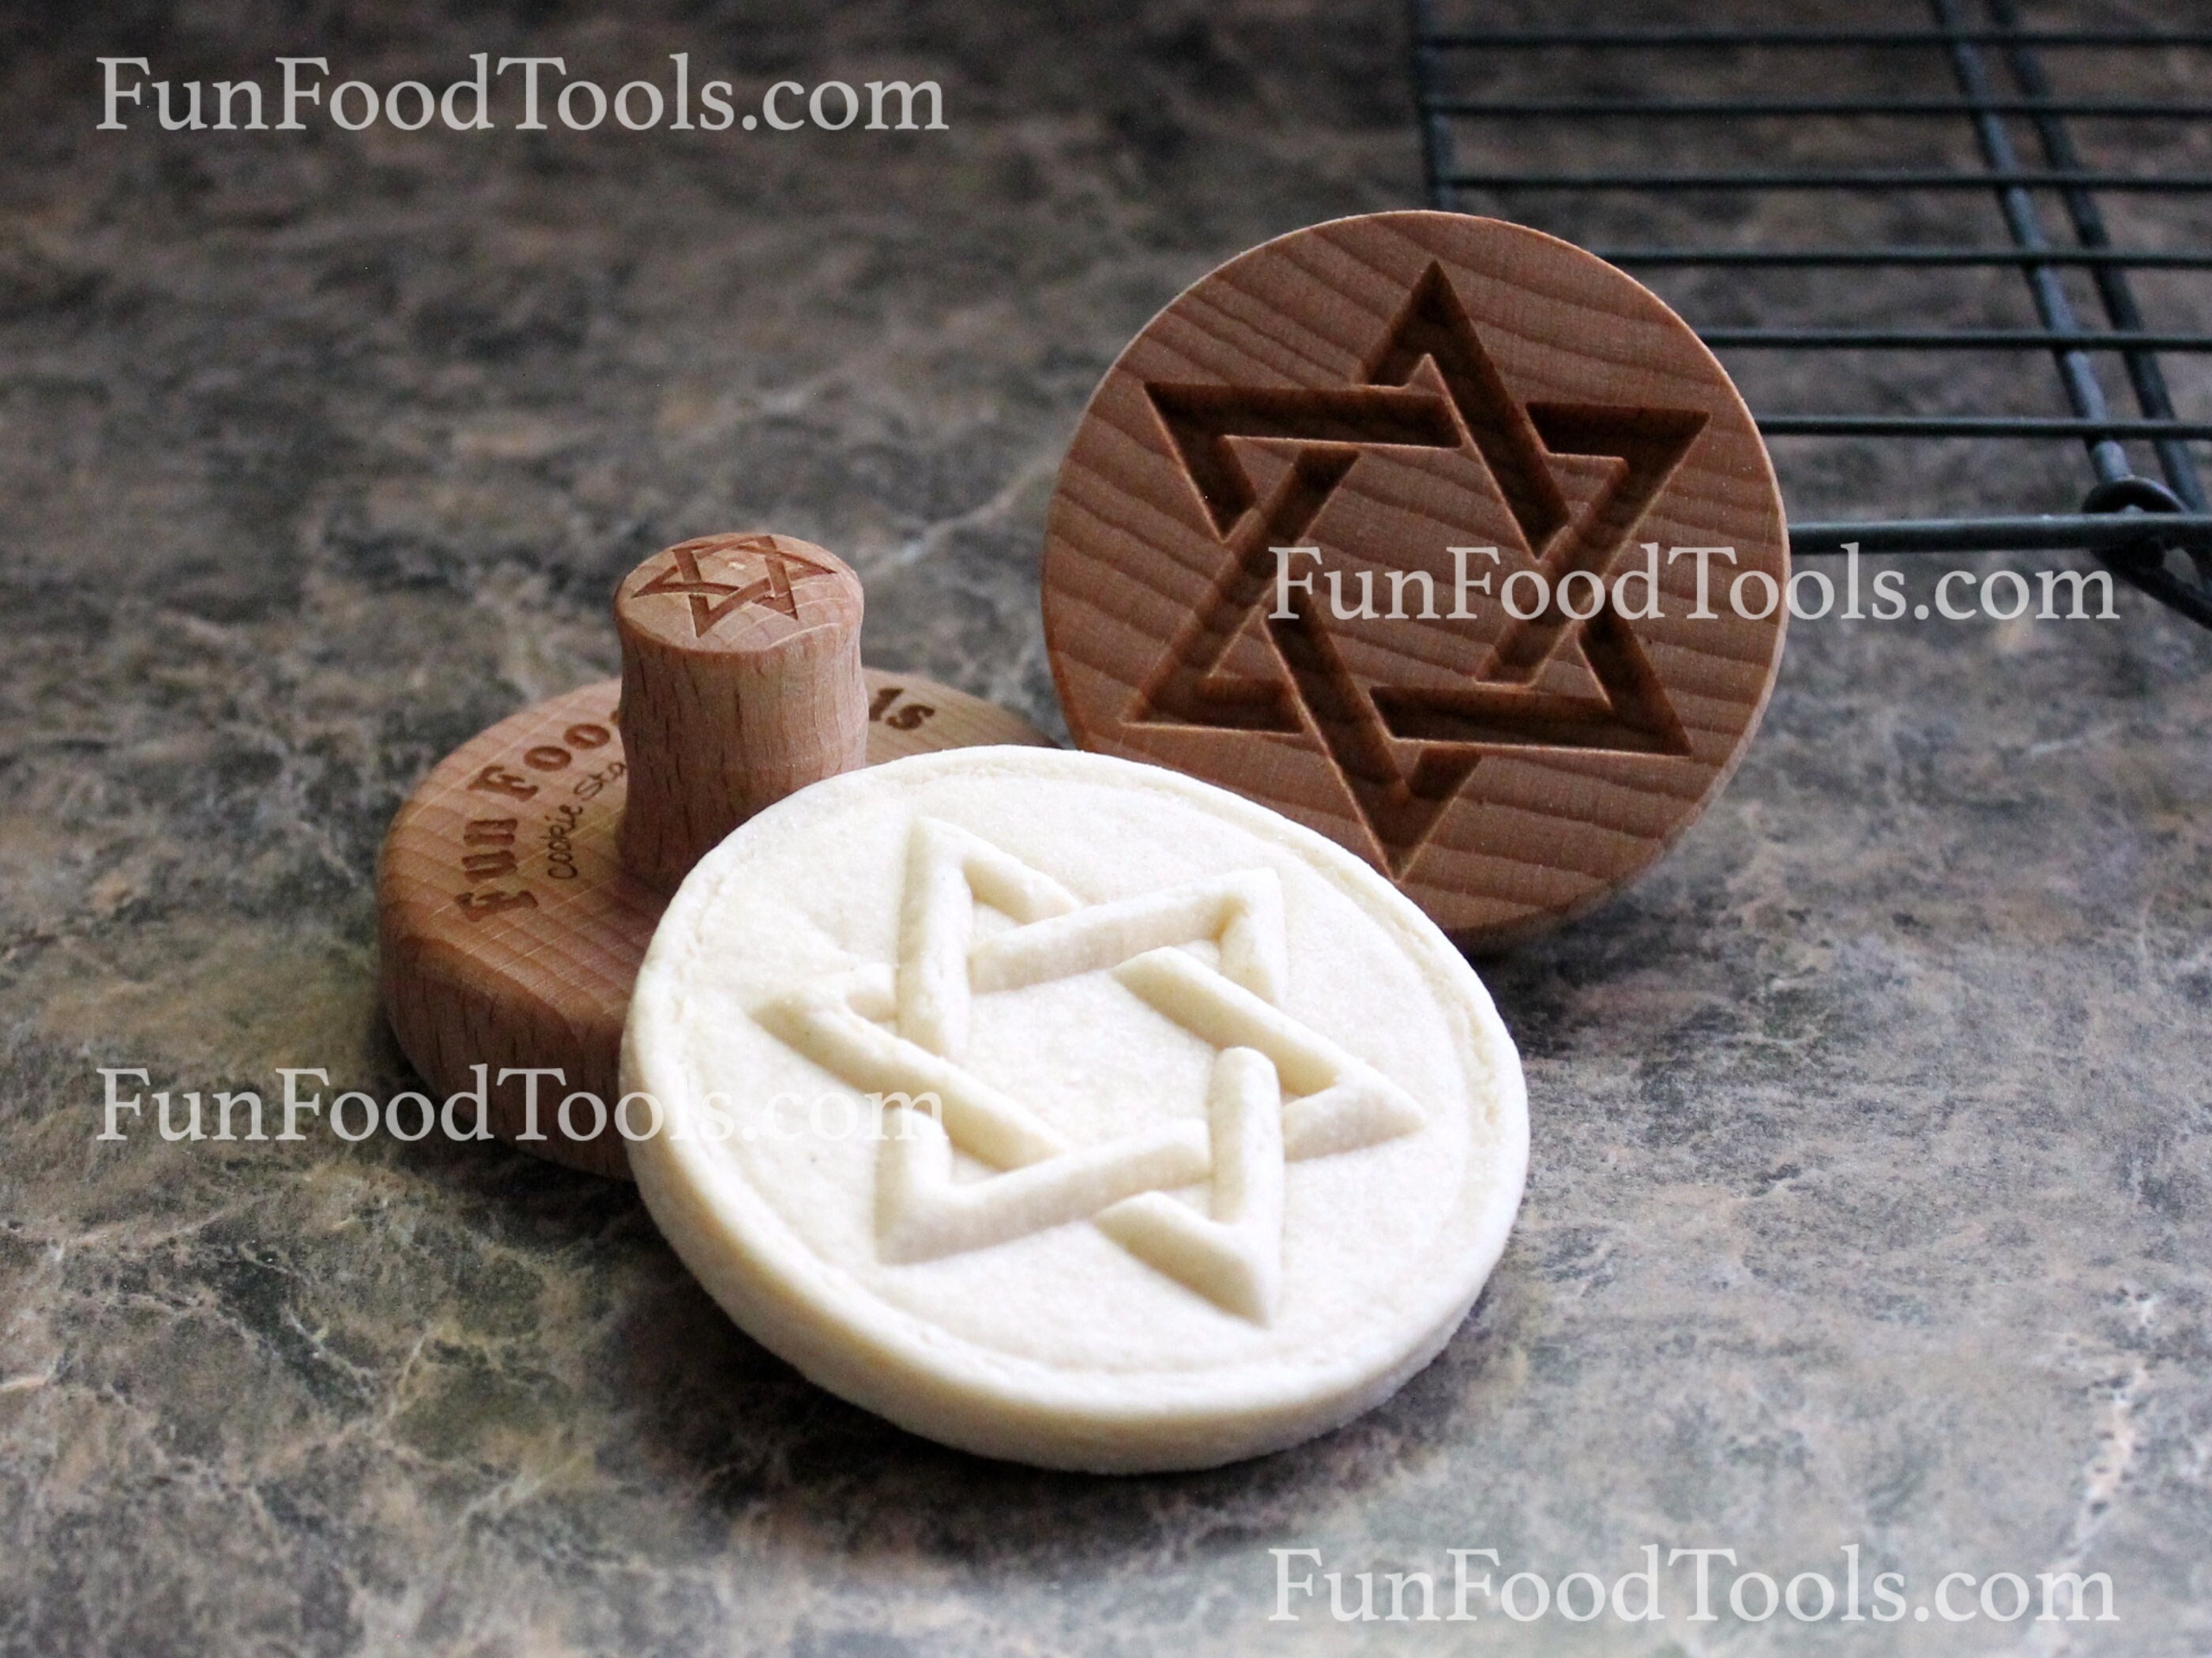 The Kosher Cook Star of David Shaped Silicone Molds for Baking